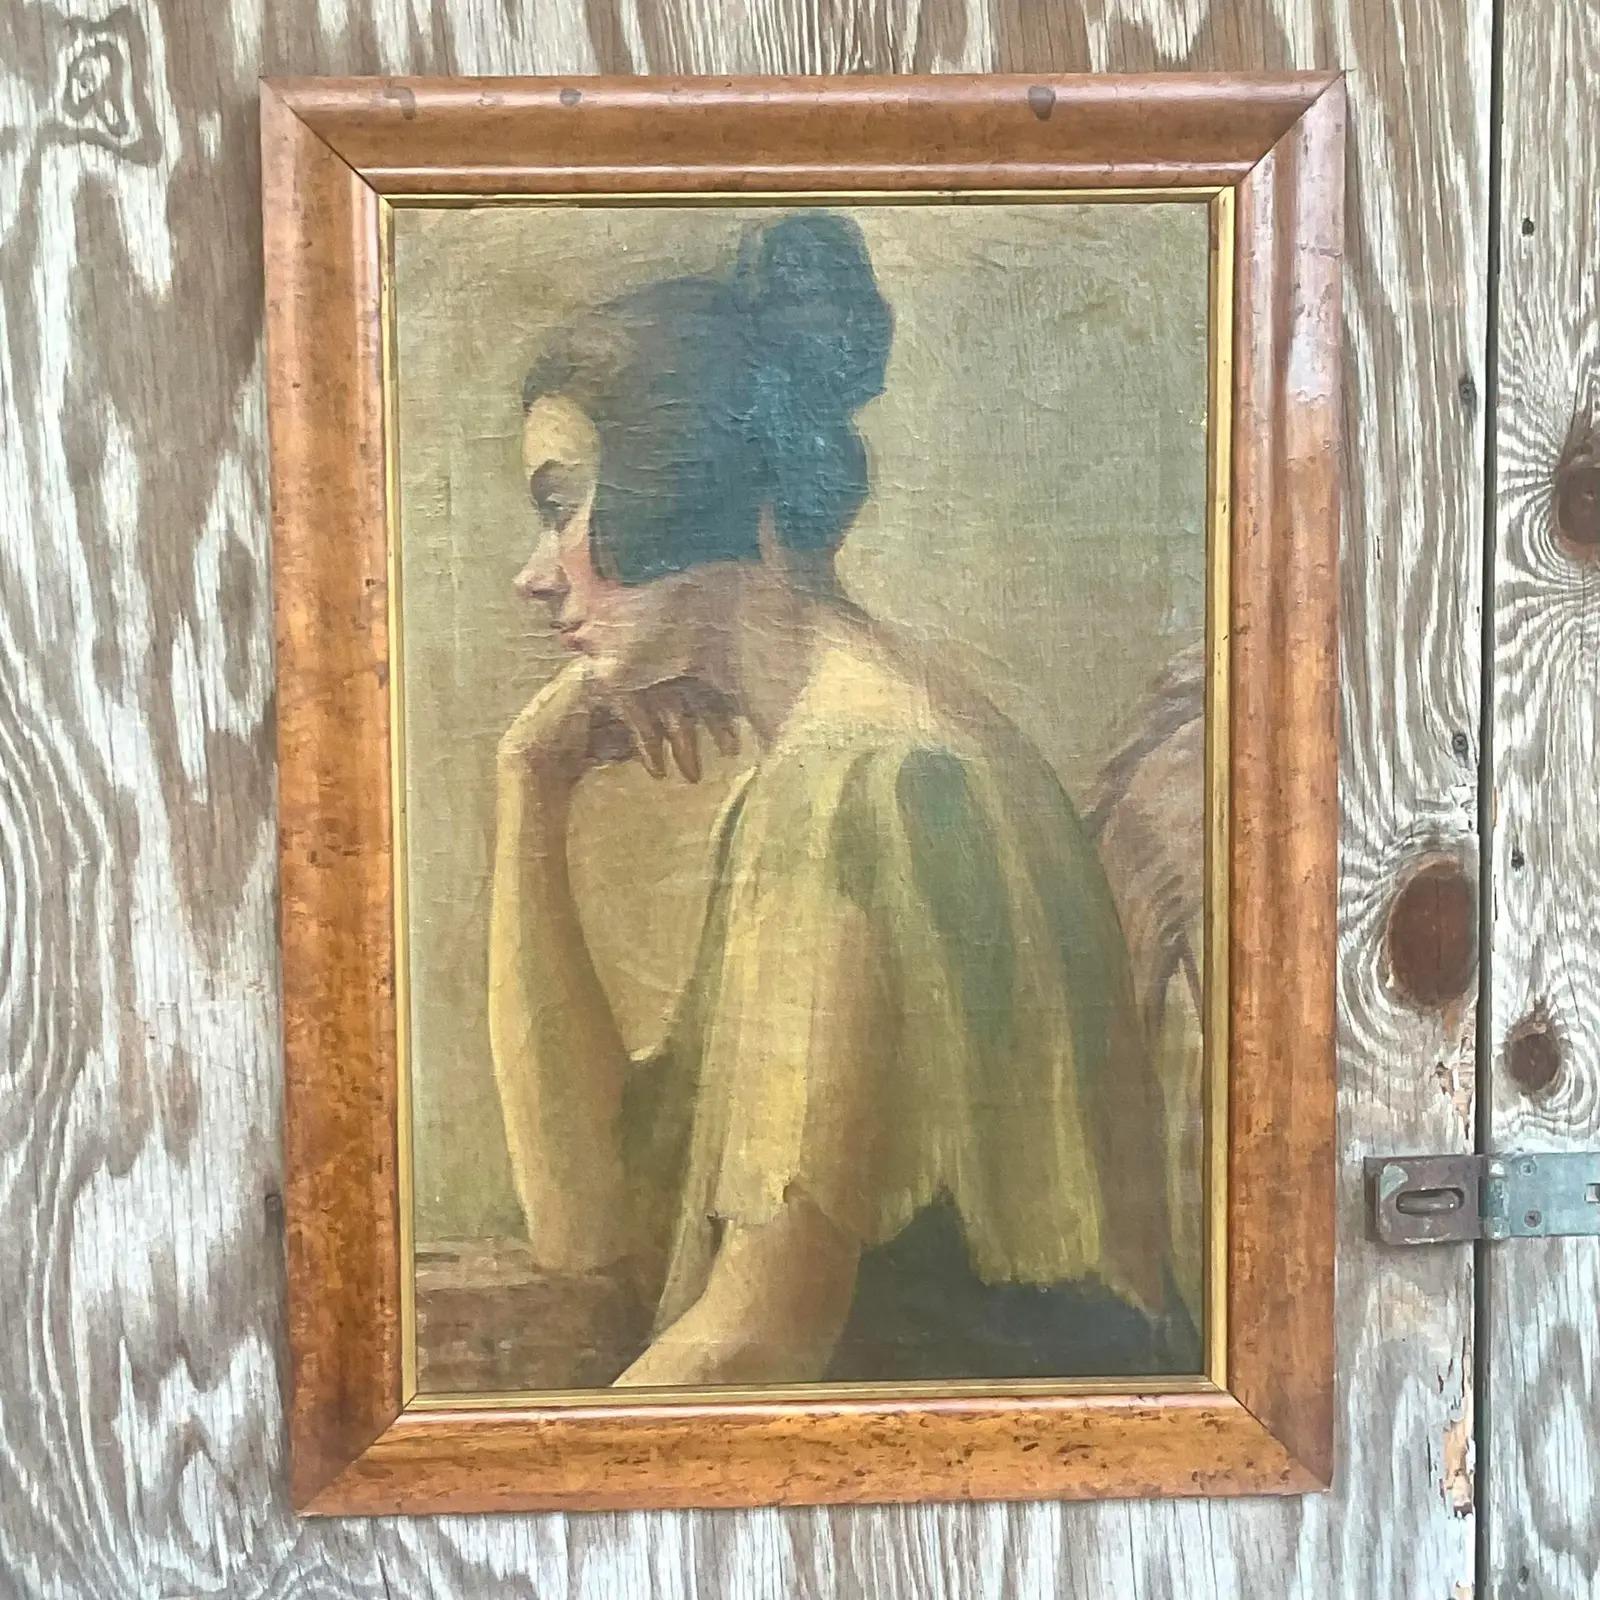 Incredible vintage original oil painting. A beautiful moody composition of a beautiful woman in deep in thought. Stunning Burl wood frame. Unsigned. Acquired from a Palm Beach estate.

The painting is in great vintage condition. Minor scuffs and